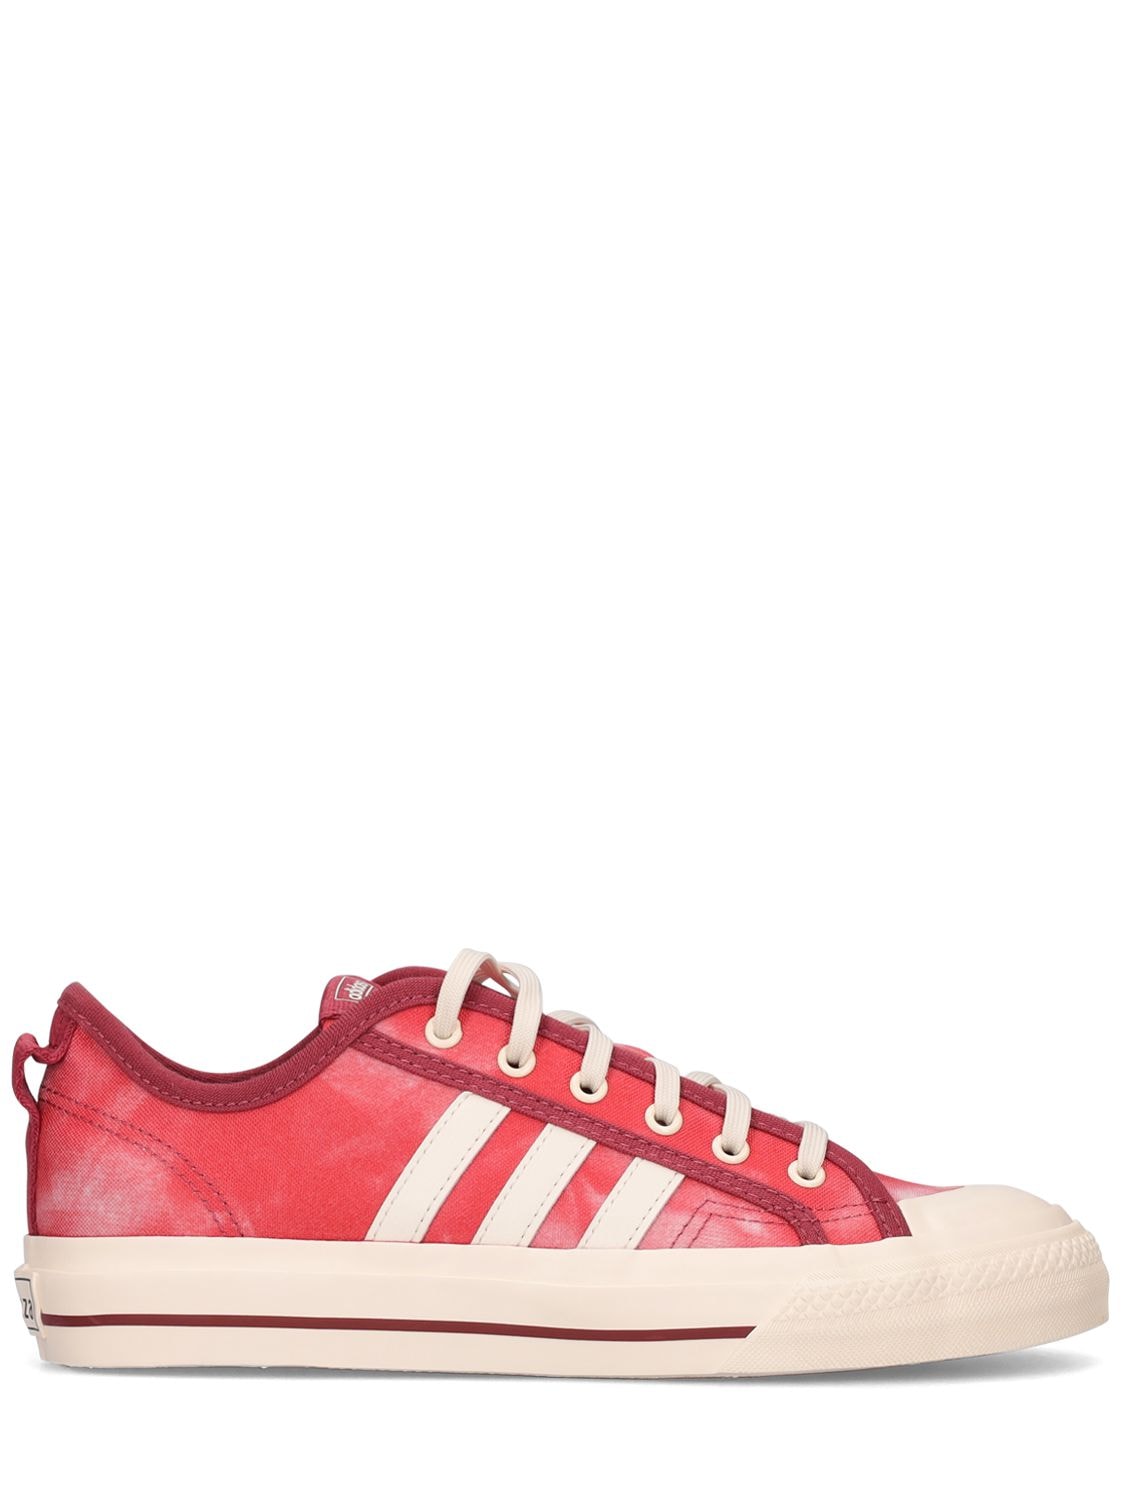 ADIDAS ORIGINALS NIZZA RECYCLED FAUX LEATHER SNEAKERS